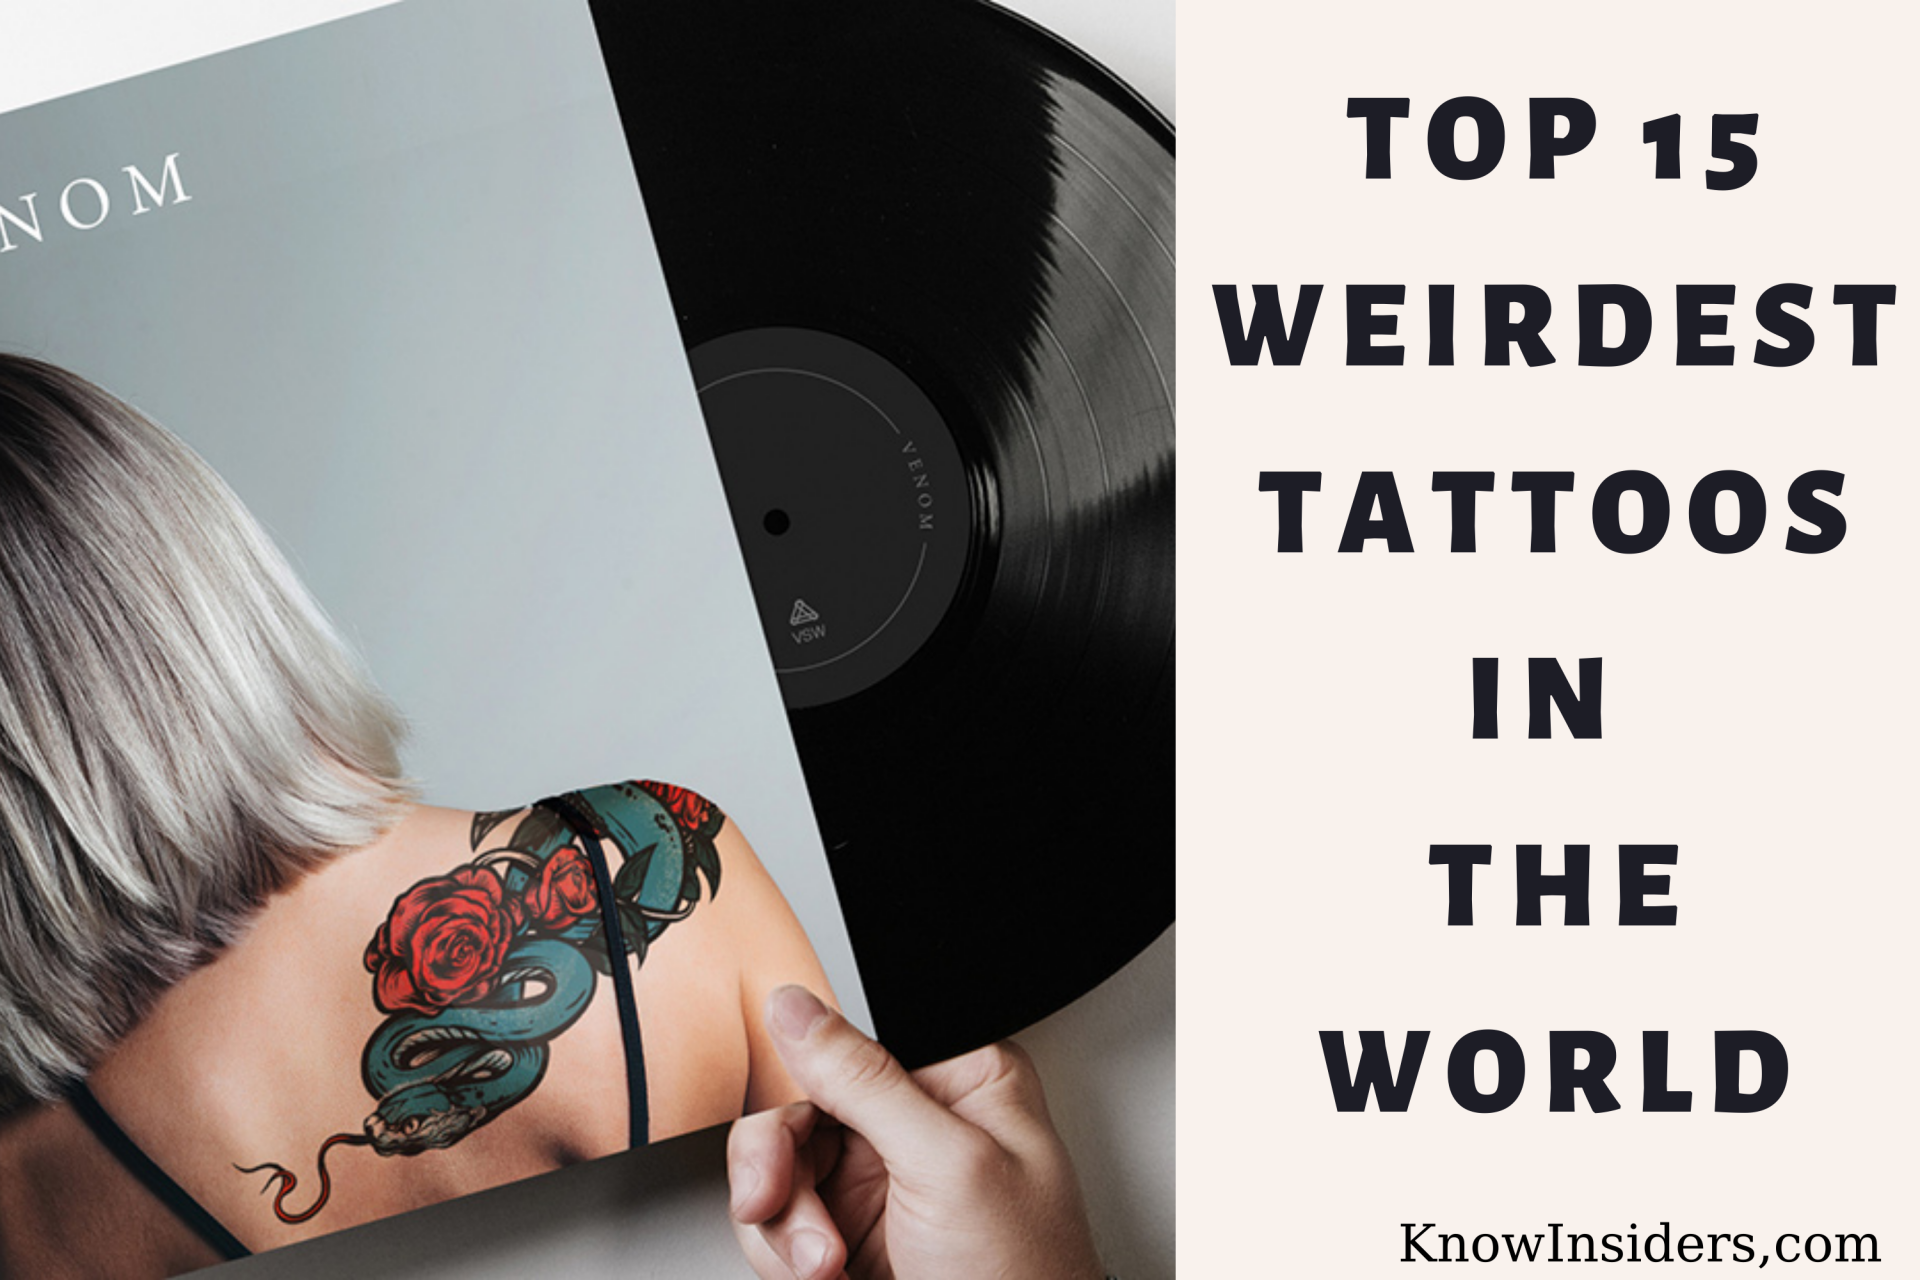 Top 15 Weirdest Tattoos in the World That Make You Laugh